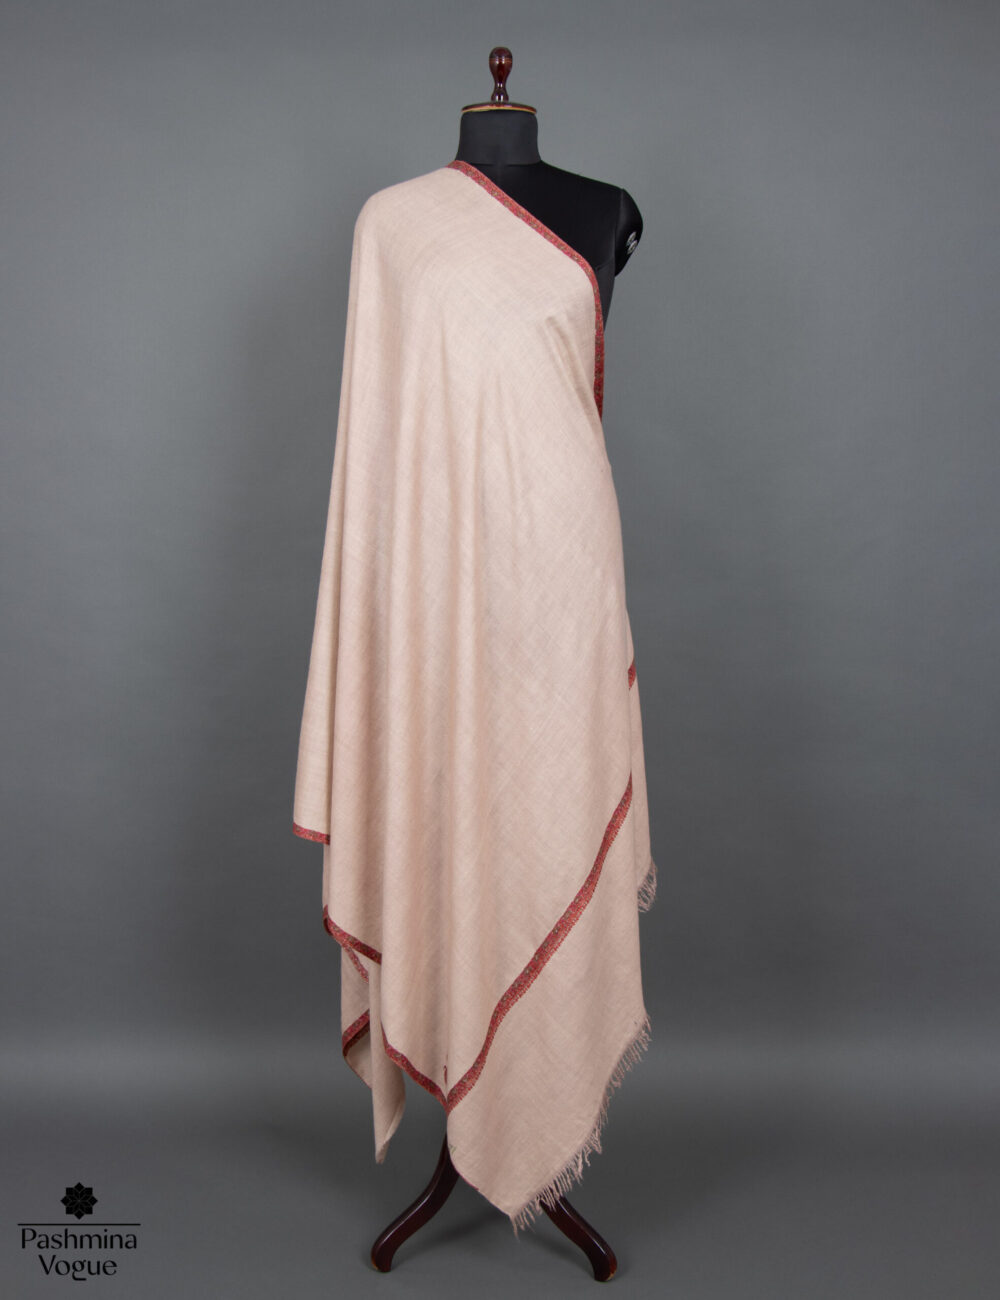 shawls-and-wraps-for-weddings